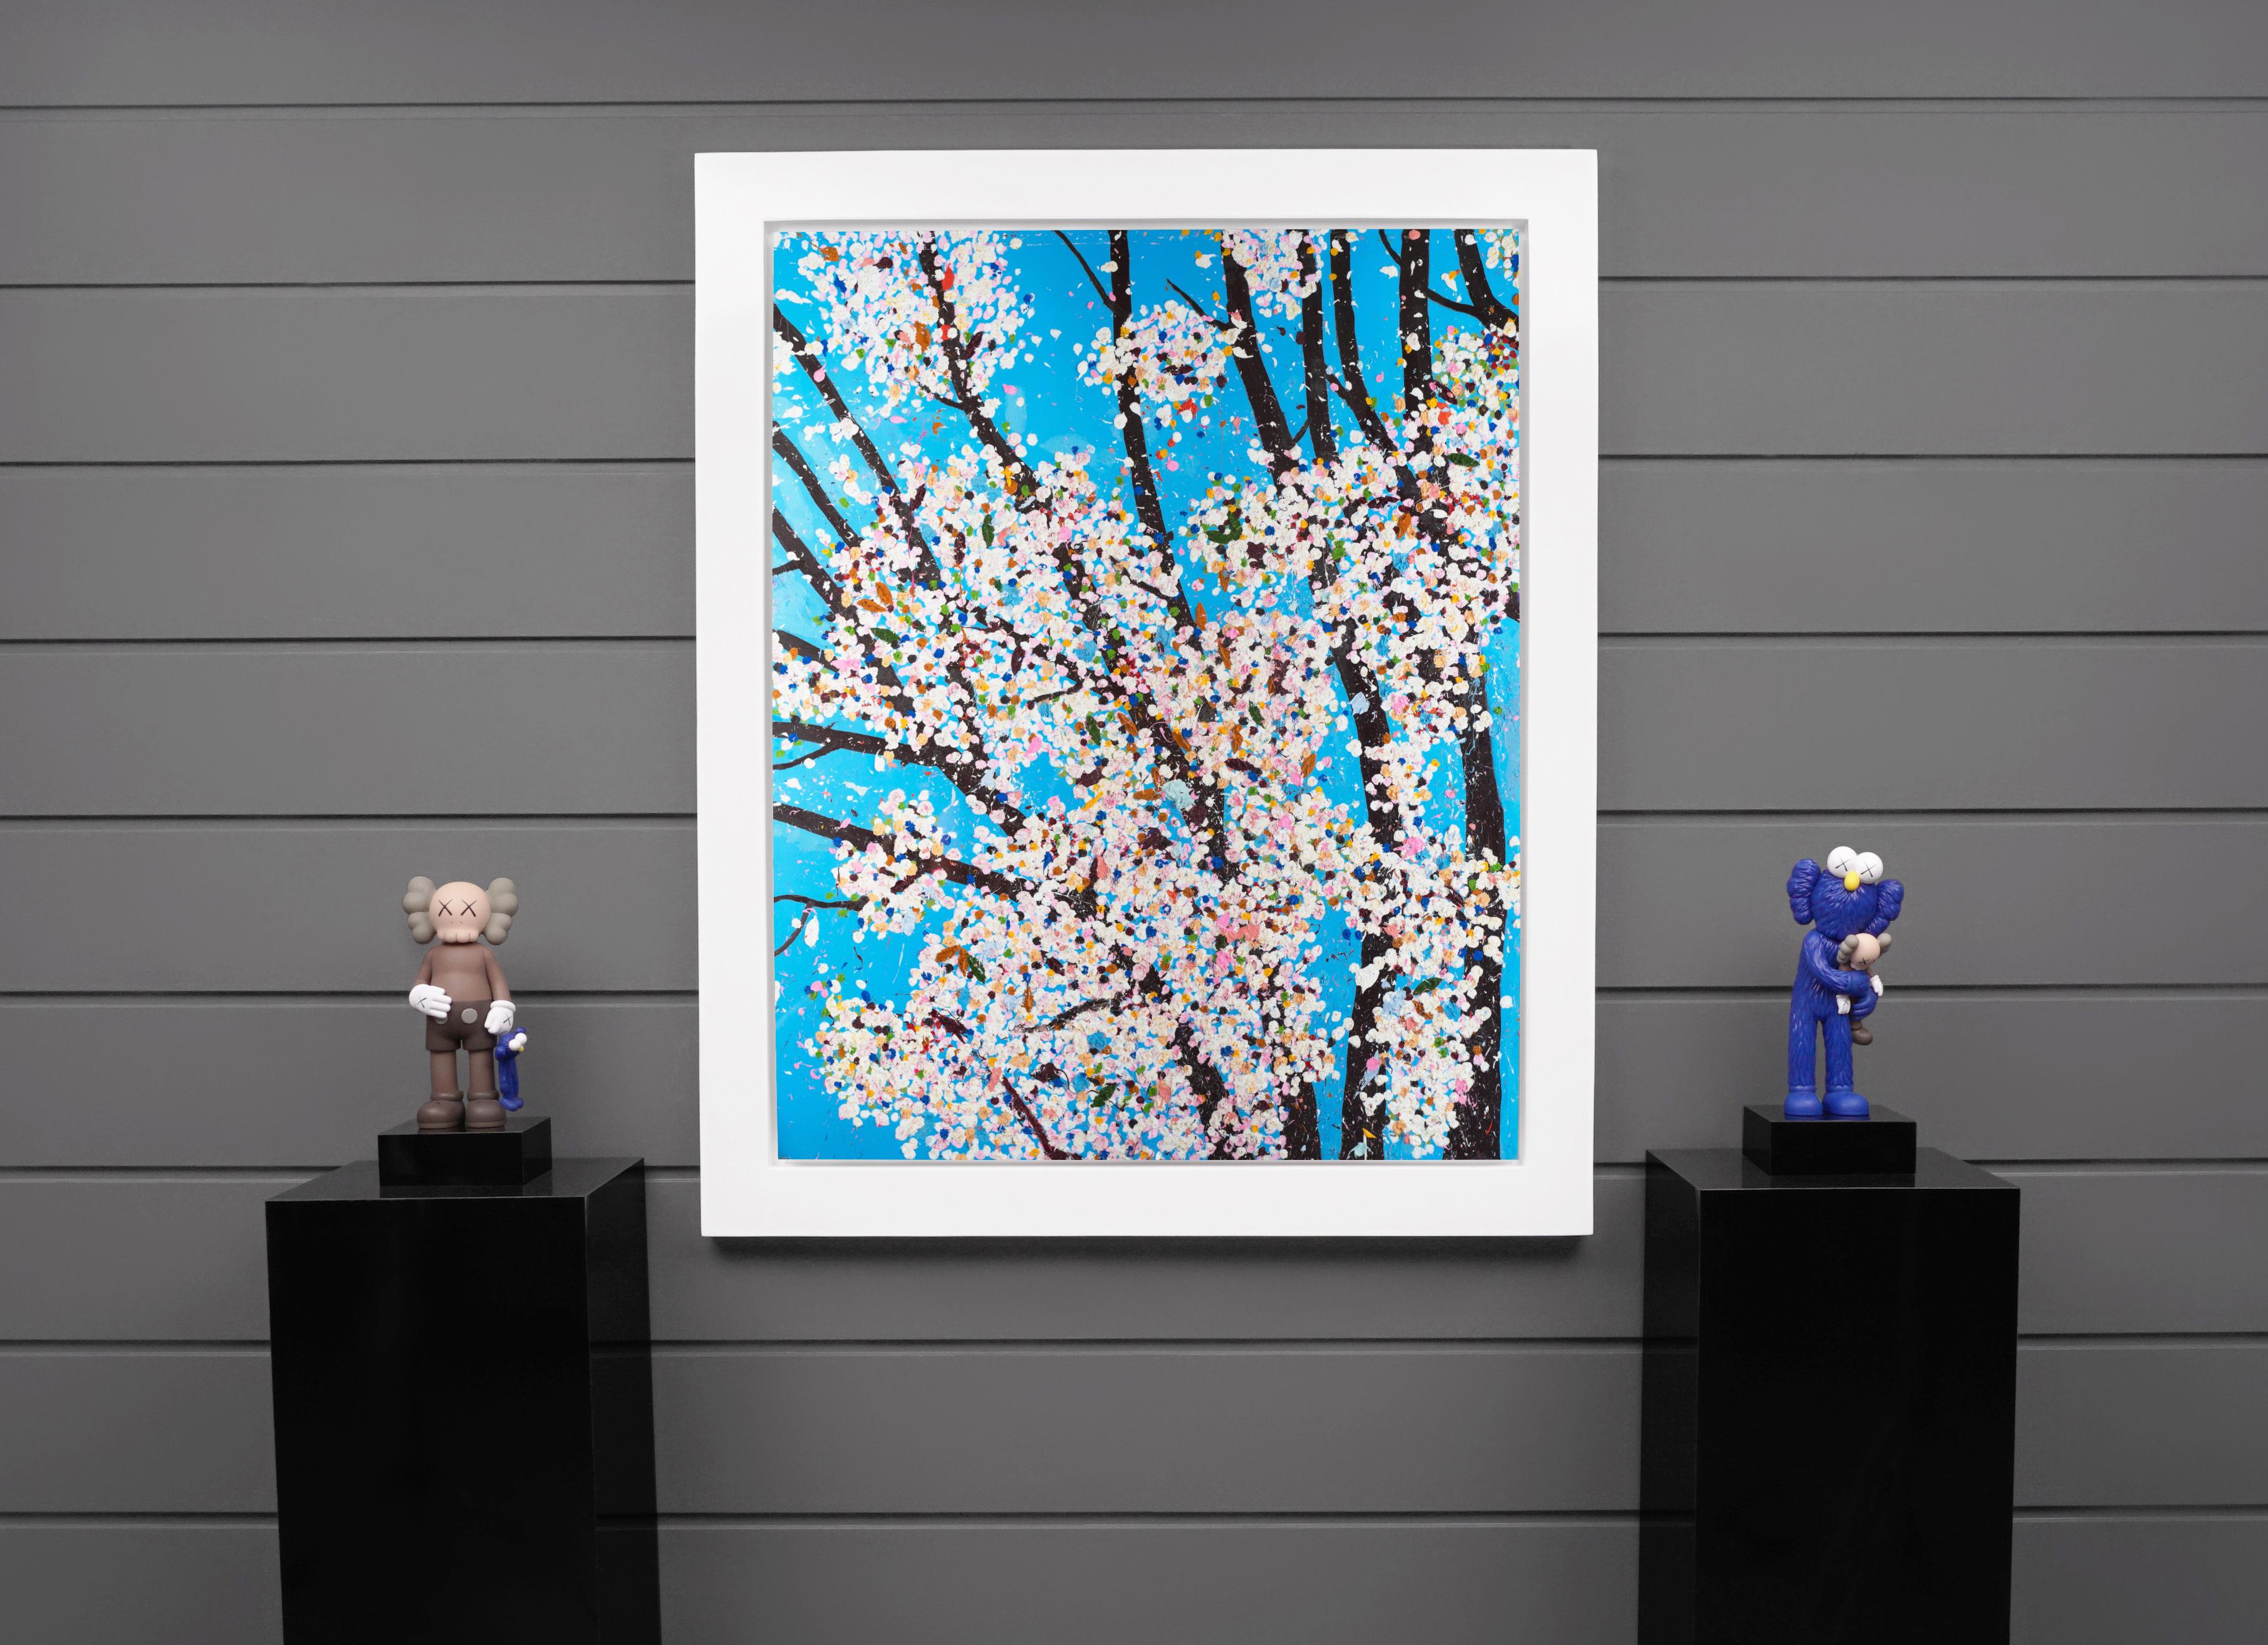 The Virtues 'Justice', Limited Edition 'Cherry Blossom' Landscape, 2021 - Print by Damien Hirst